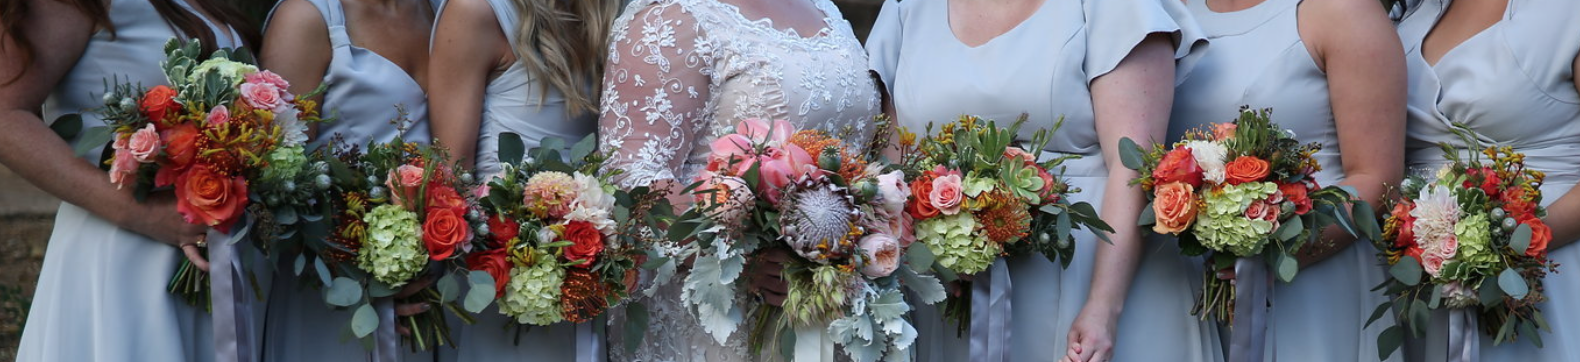 Beautiful bouquets being held by a bride and her six bridesmaids.  Private venue location.